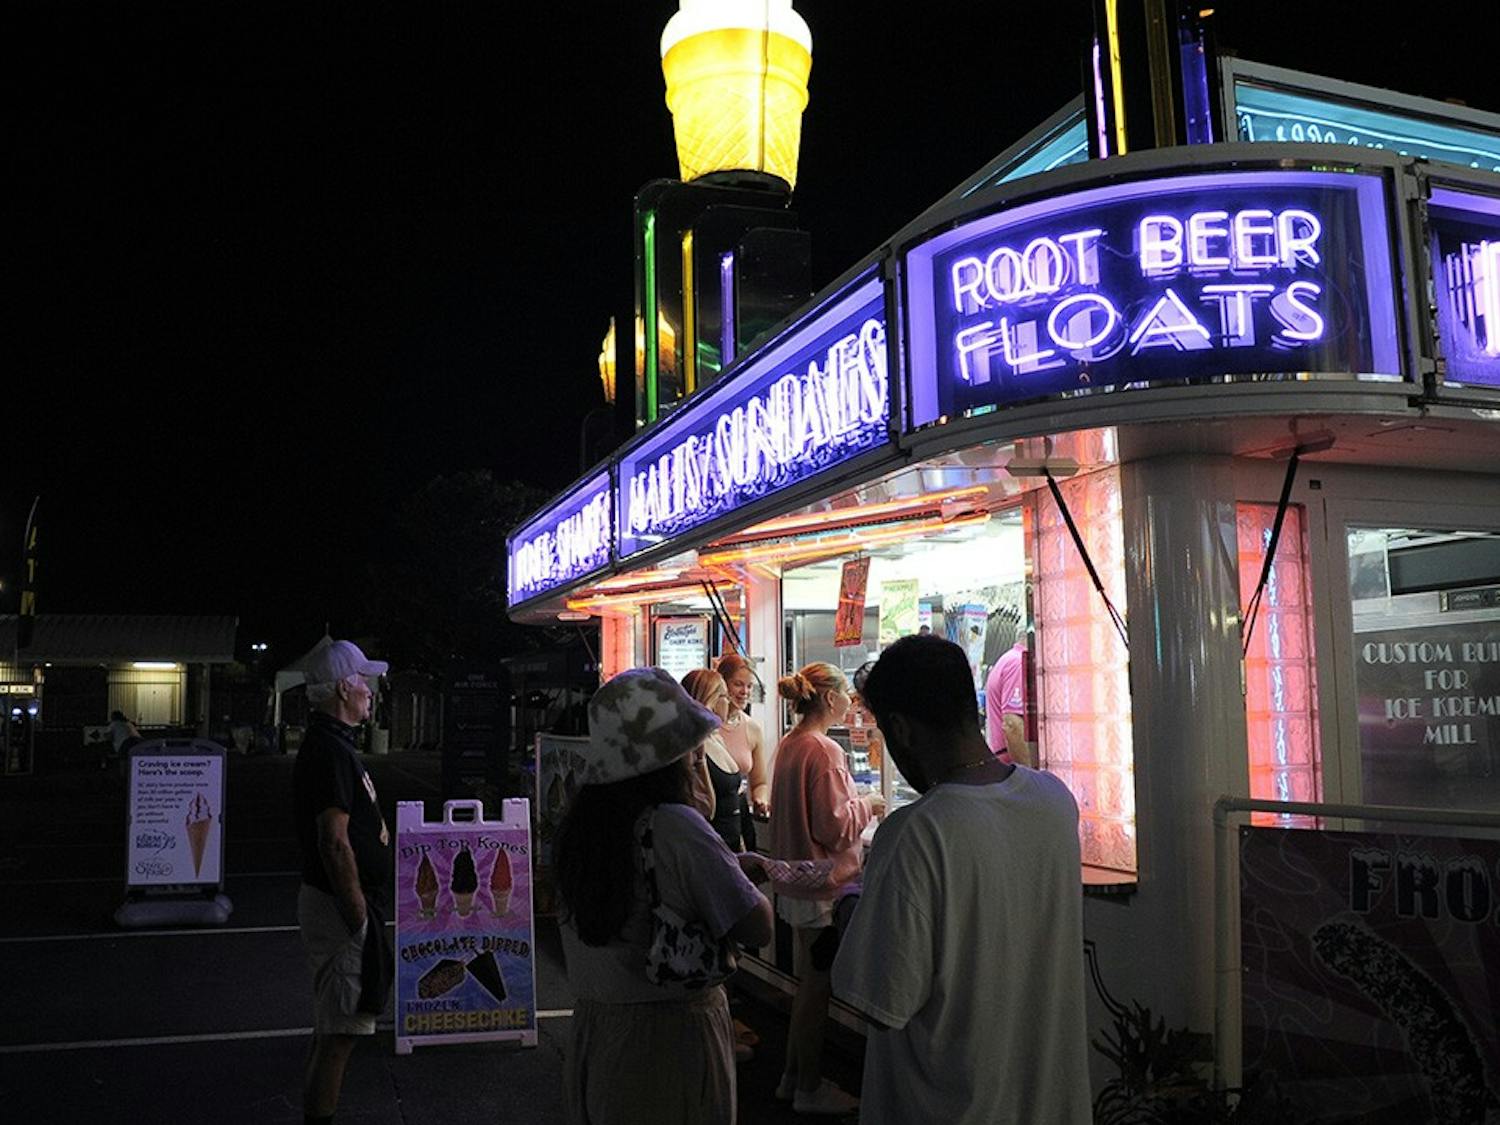 People attending the fair line up at a food stand that serves root beer floats and ice cream.&nbsp;